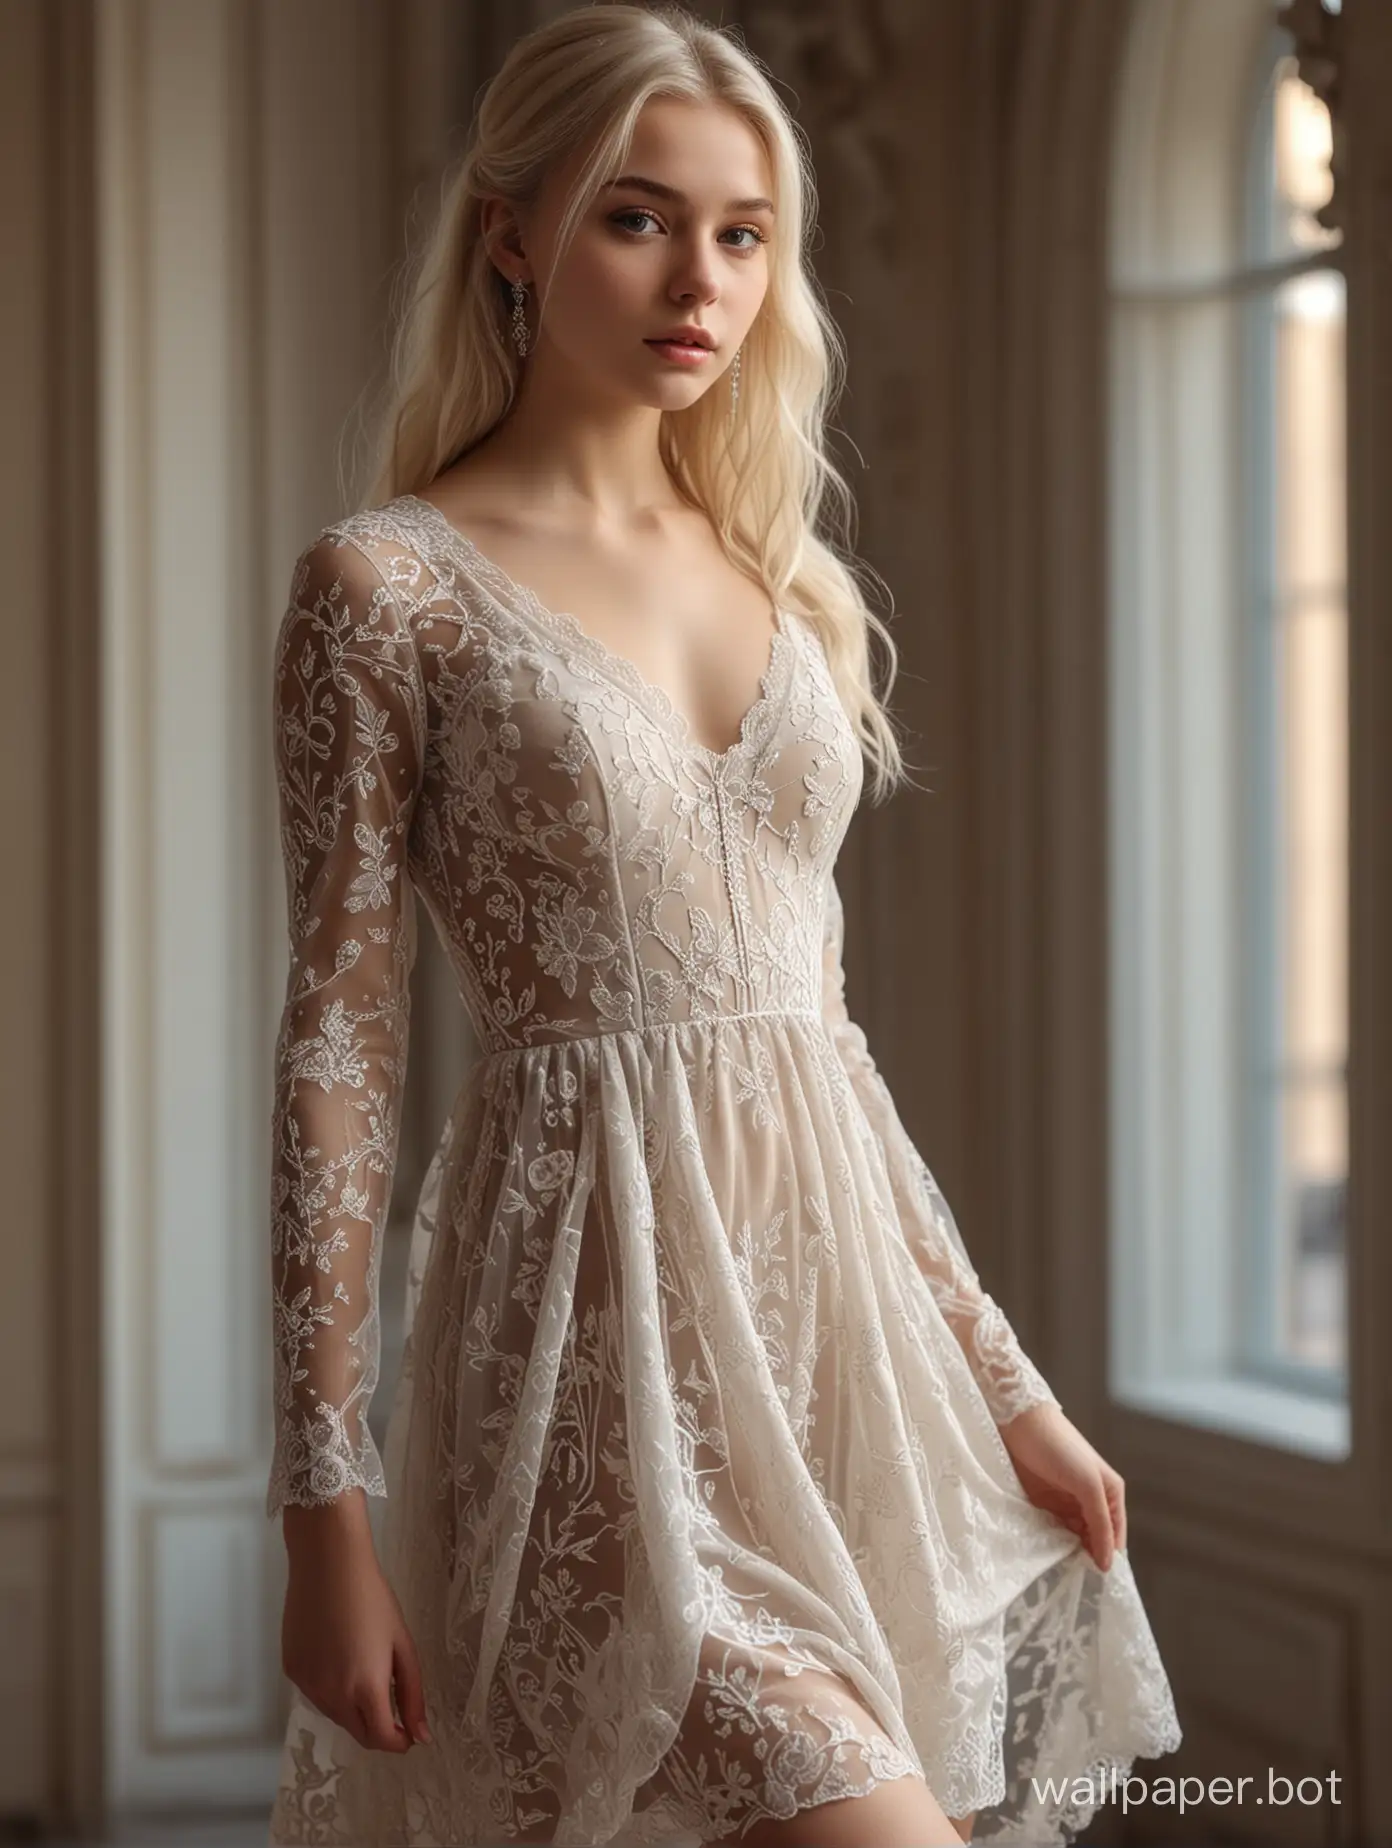 Photo of a beautiful 18 y.o. russian model, full body, wide shot, detailed skin, perfect body, very detailed, 4K HQ, 8K HDR, High contrast, shadows, platinum blonde hair, baroque sheer dress, full body view